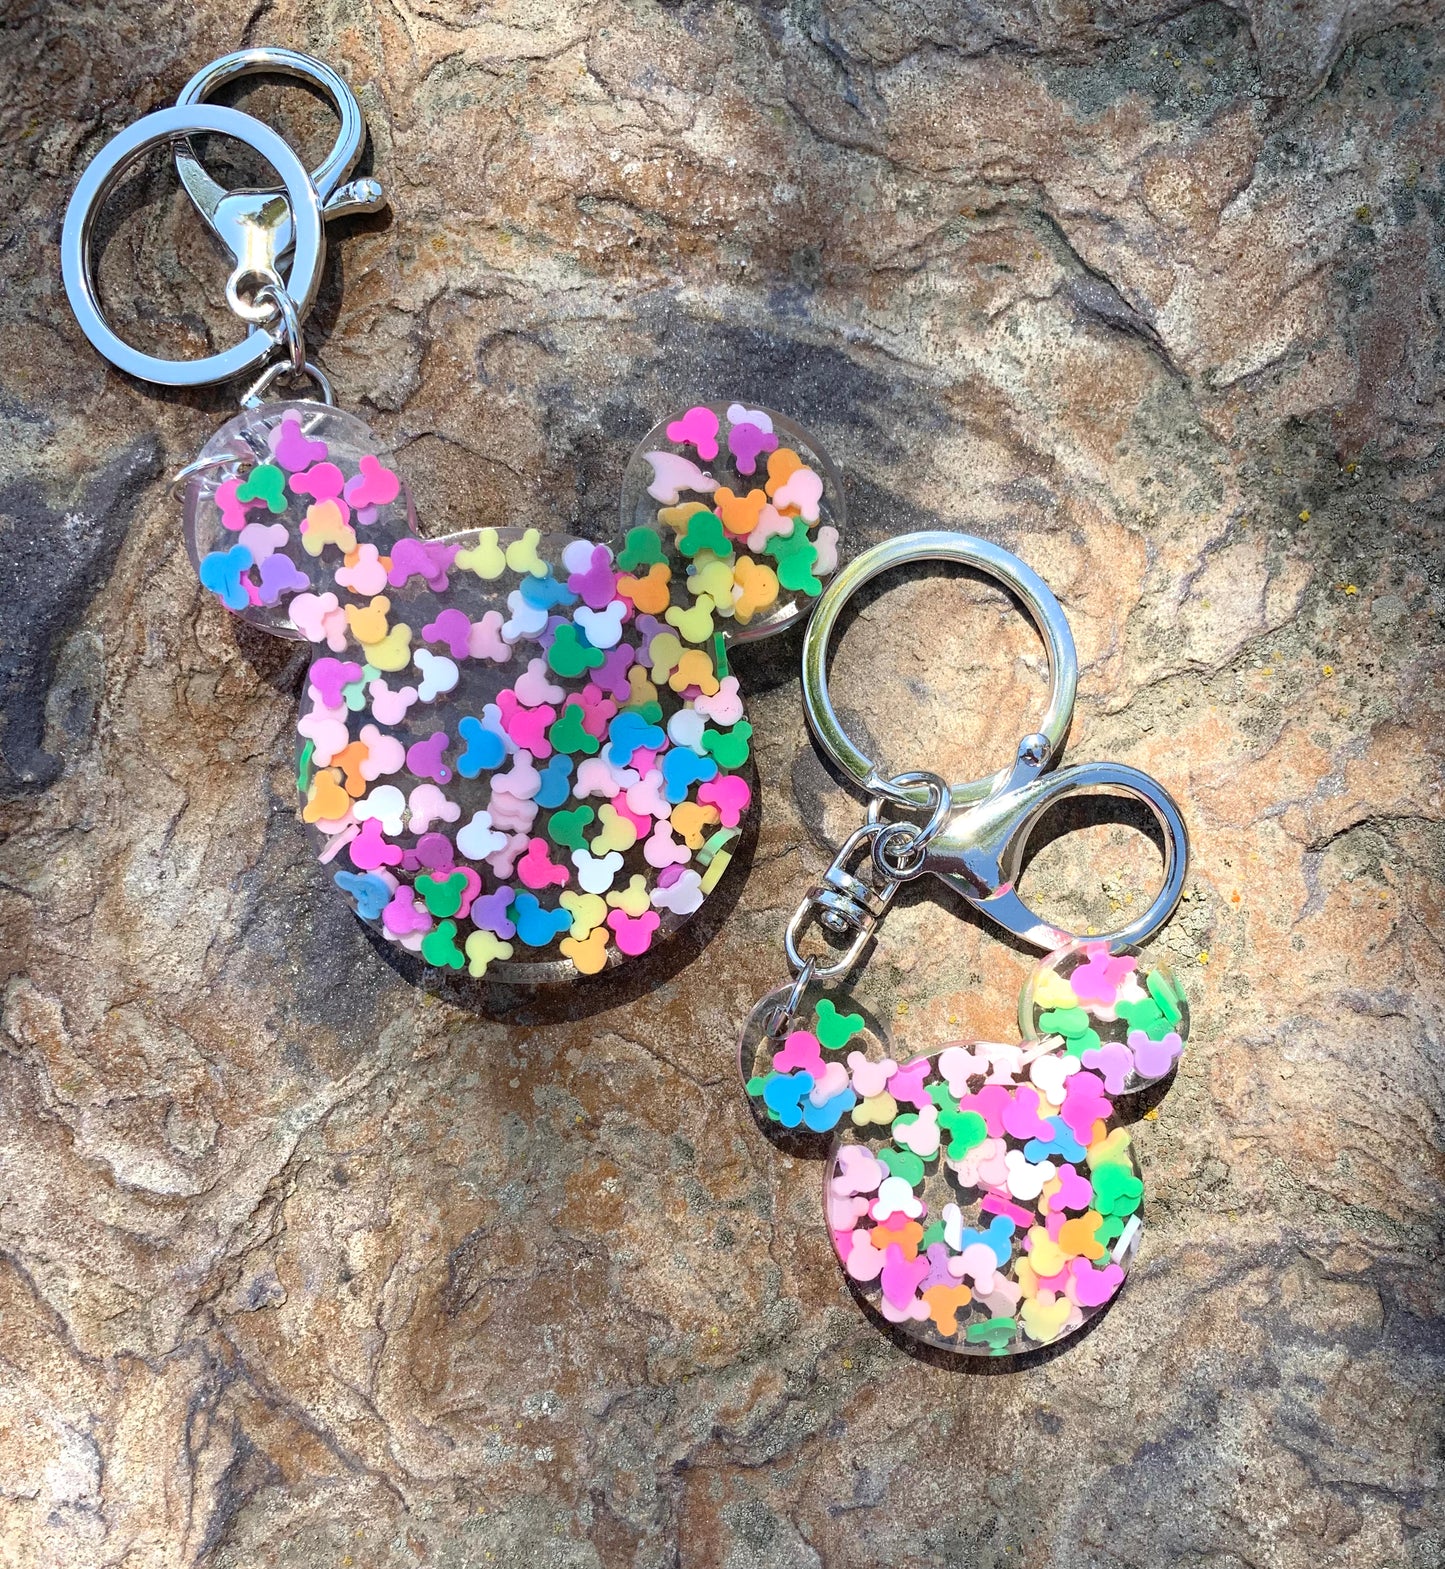 Mouse keychains